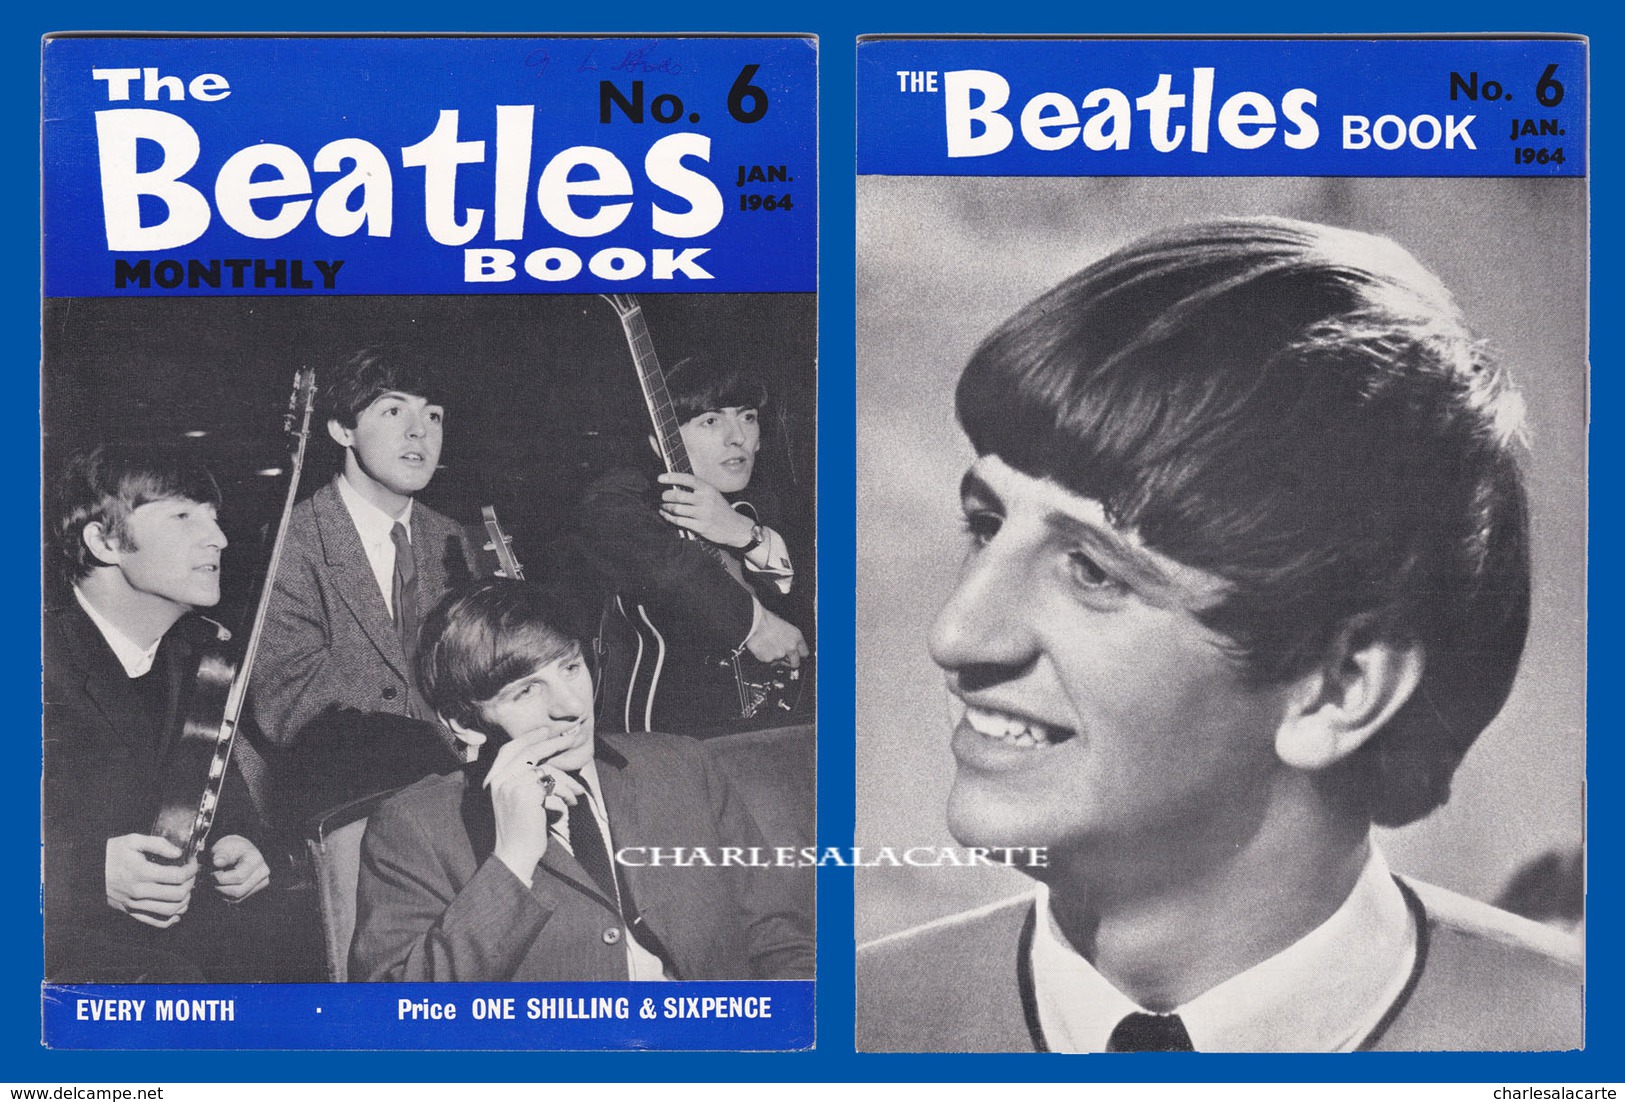 1964 JANUARY THE BEATLES MONTHLY BOOK No.6 AUTHENTIC SUBERB CONDITION SEE THE SCAN - Divertimento